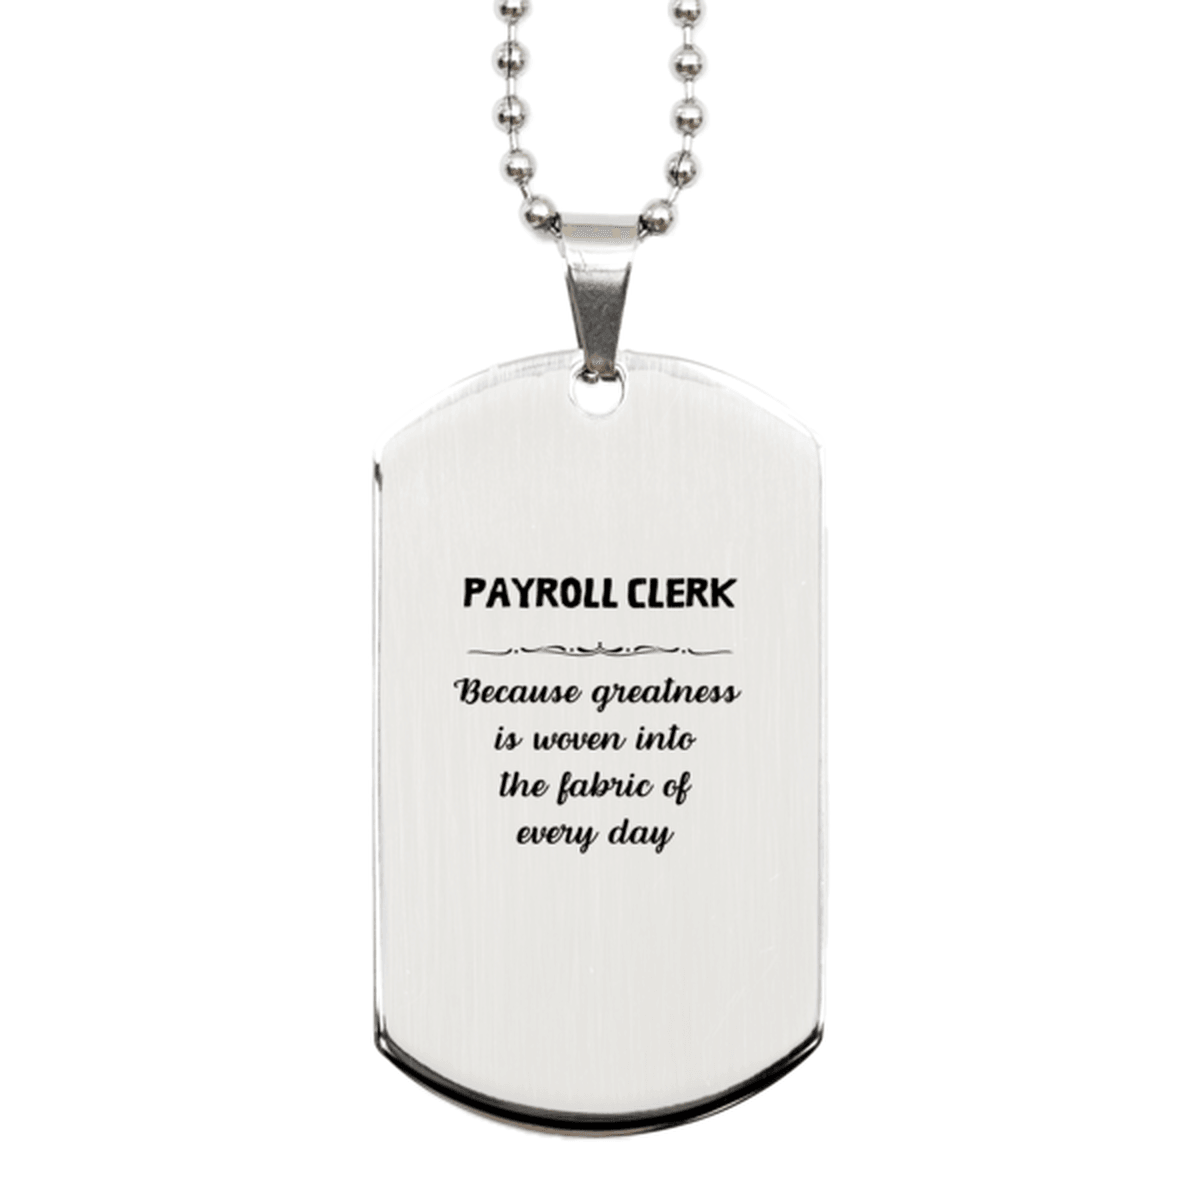 Sarcastic Payroll Clerk Silver Dog Tag Gifts, Christmas Holiday Gifts for Payroll Clerk Birthday, Payroll Clerk: Because greatness is woven into the fabric of every day, Coworkers, Friends - Mallard Moon Gift Shop